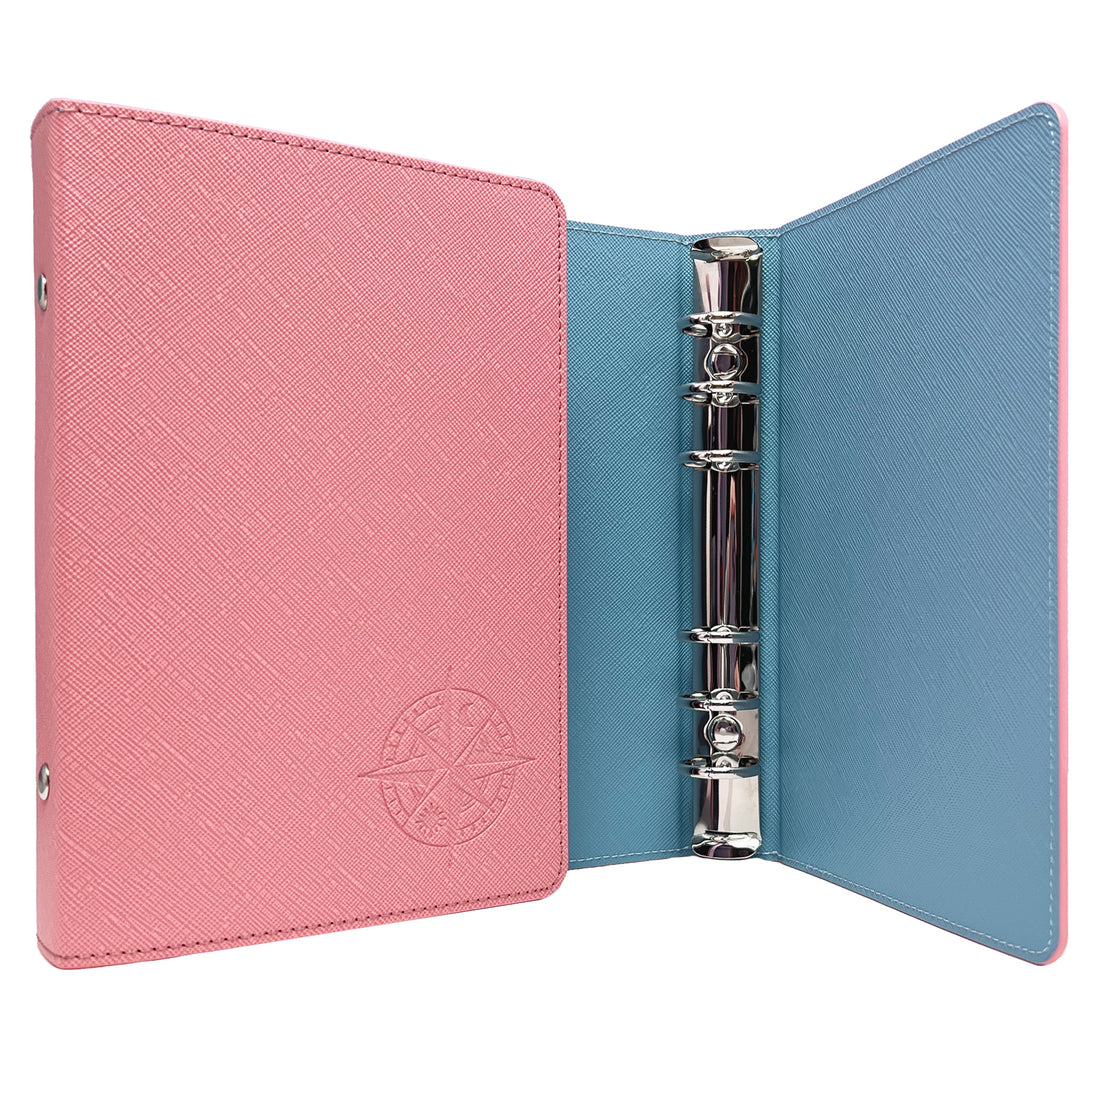 Personal Size DUO Planner【Pink Beach】